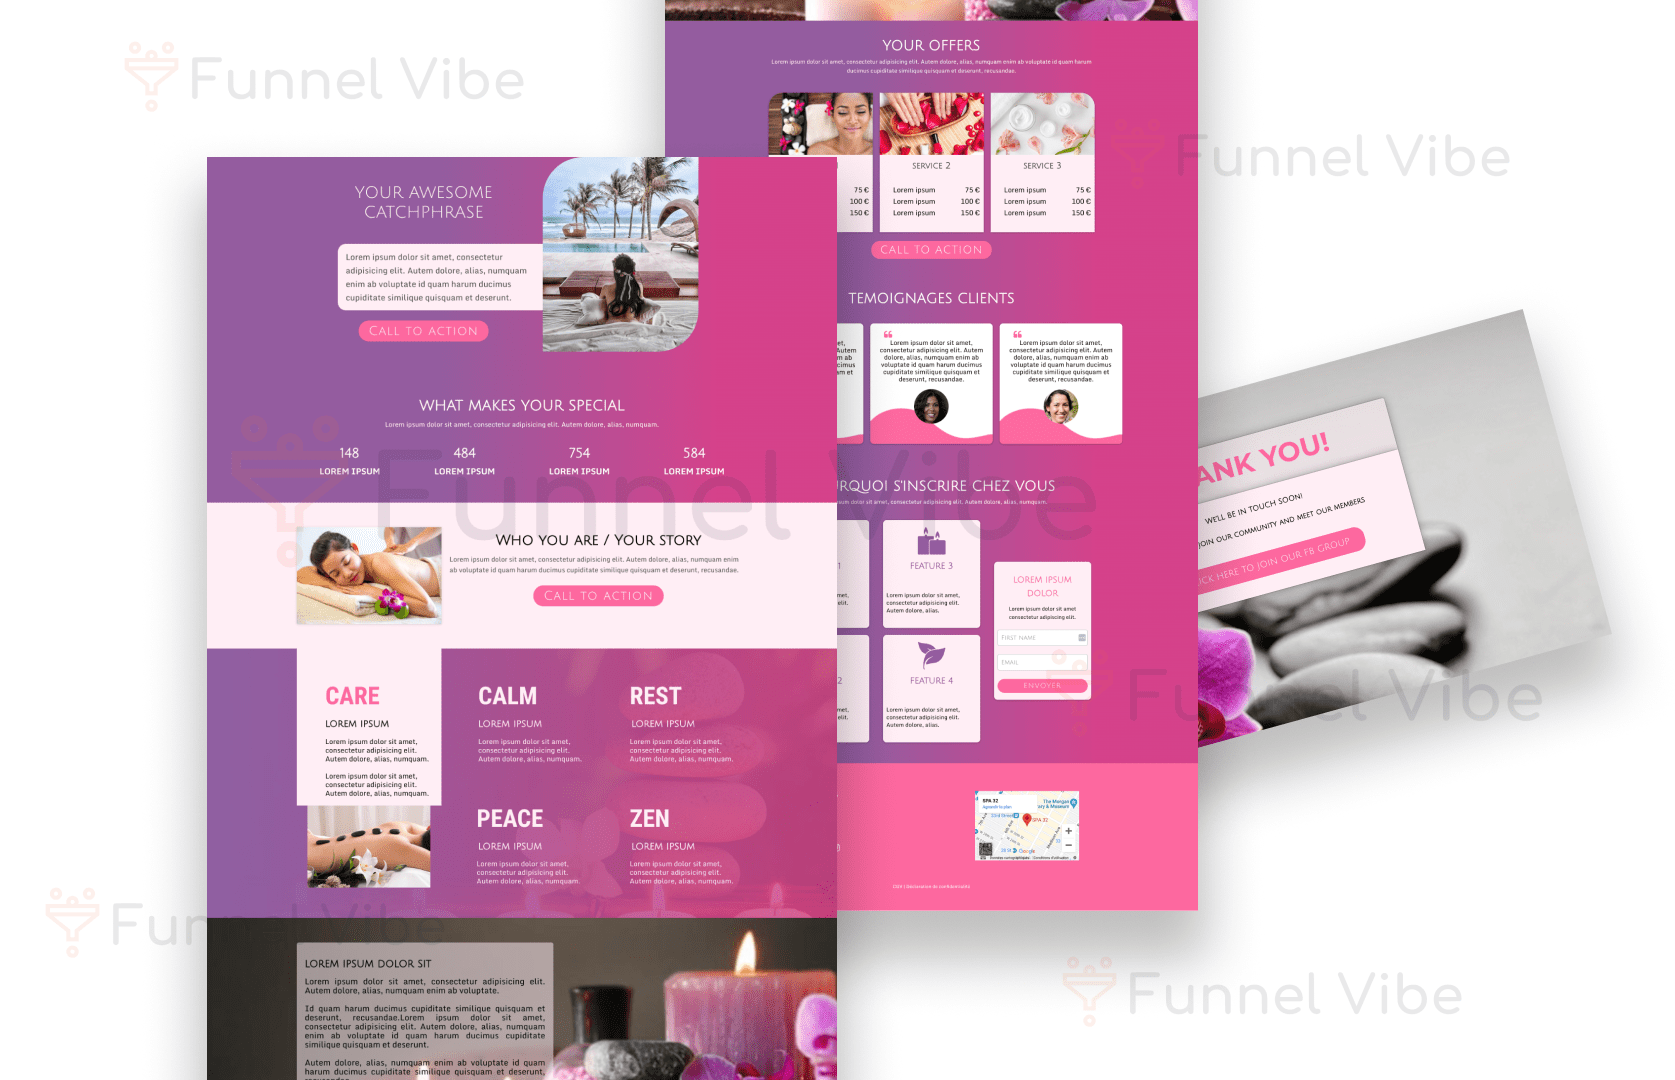 Yoga Session Booking Funnel